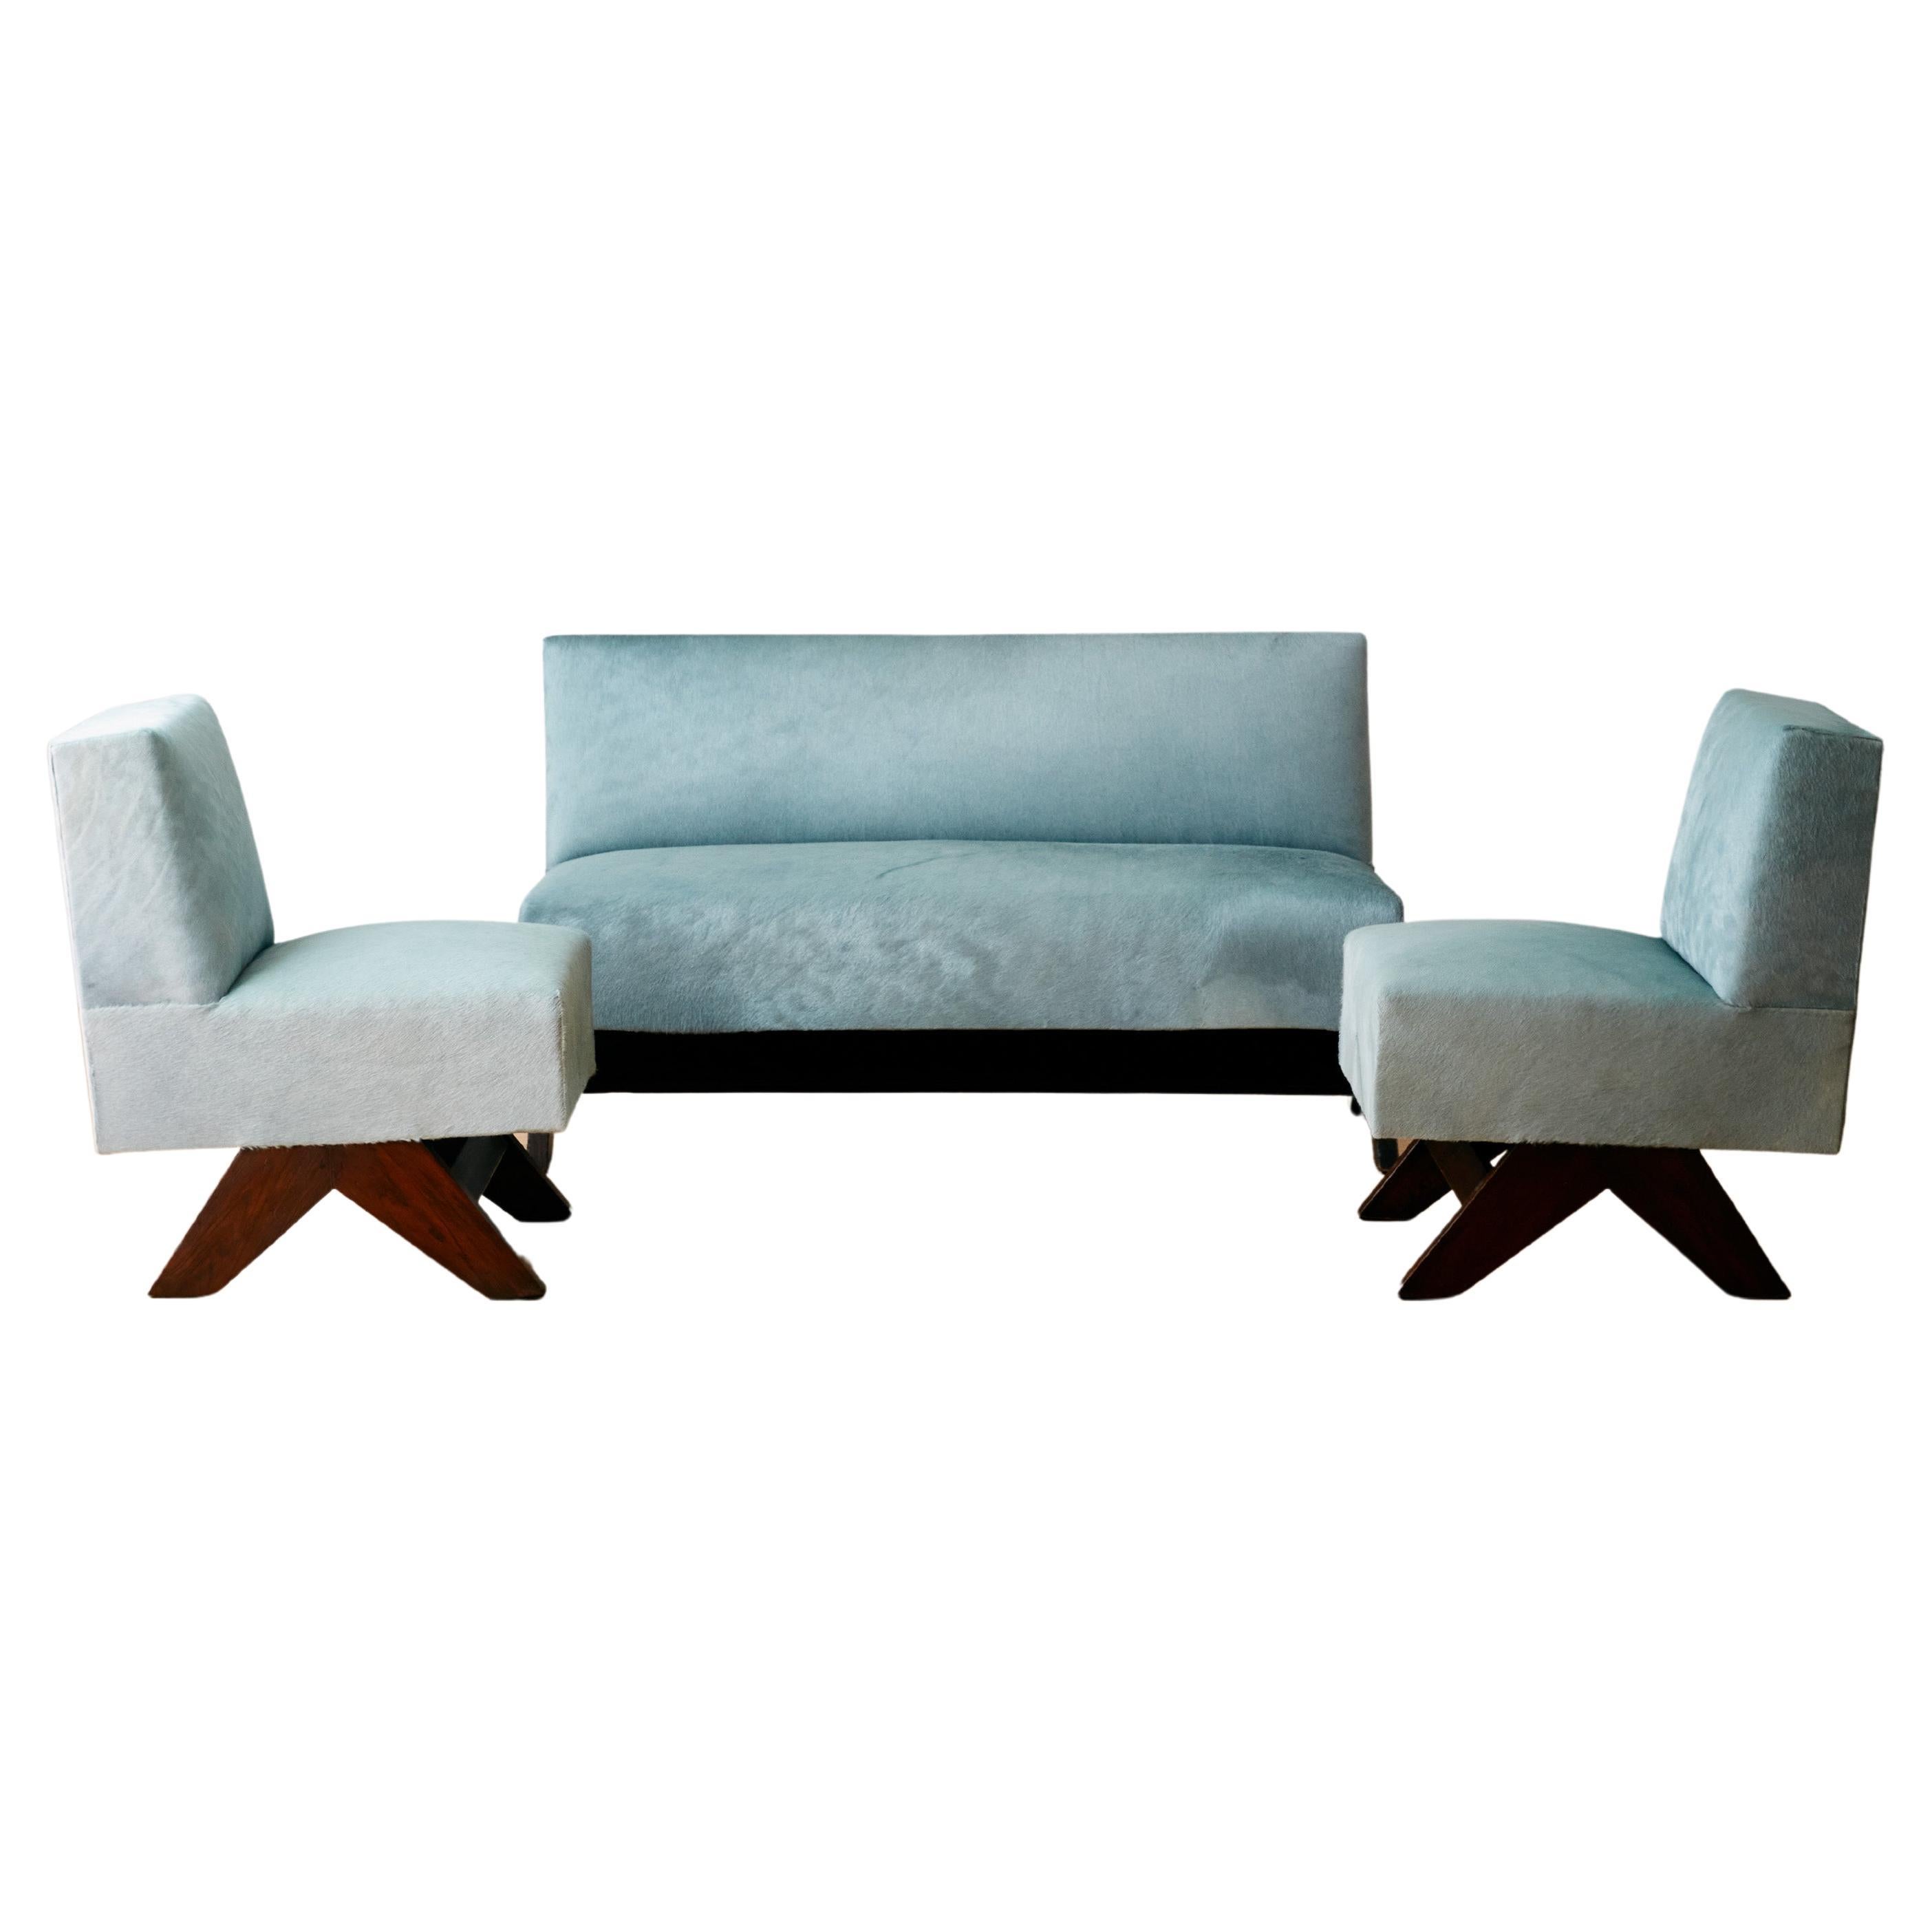 Rare Settee and Pair of Low Lounge Chairs by Pierre Jeanneret For Sale